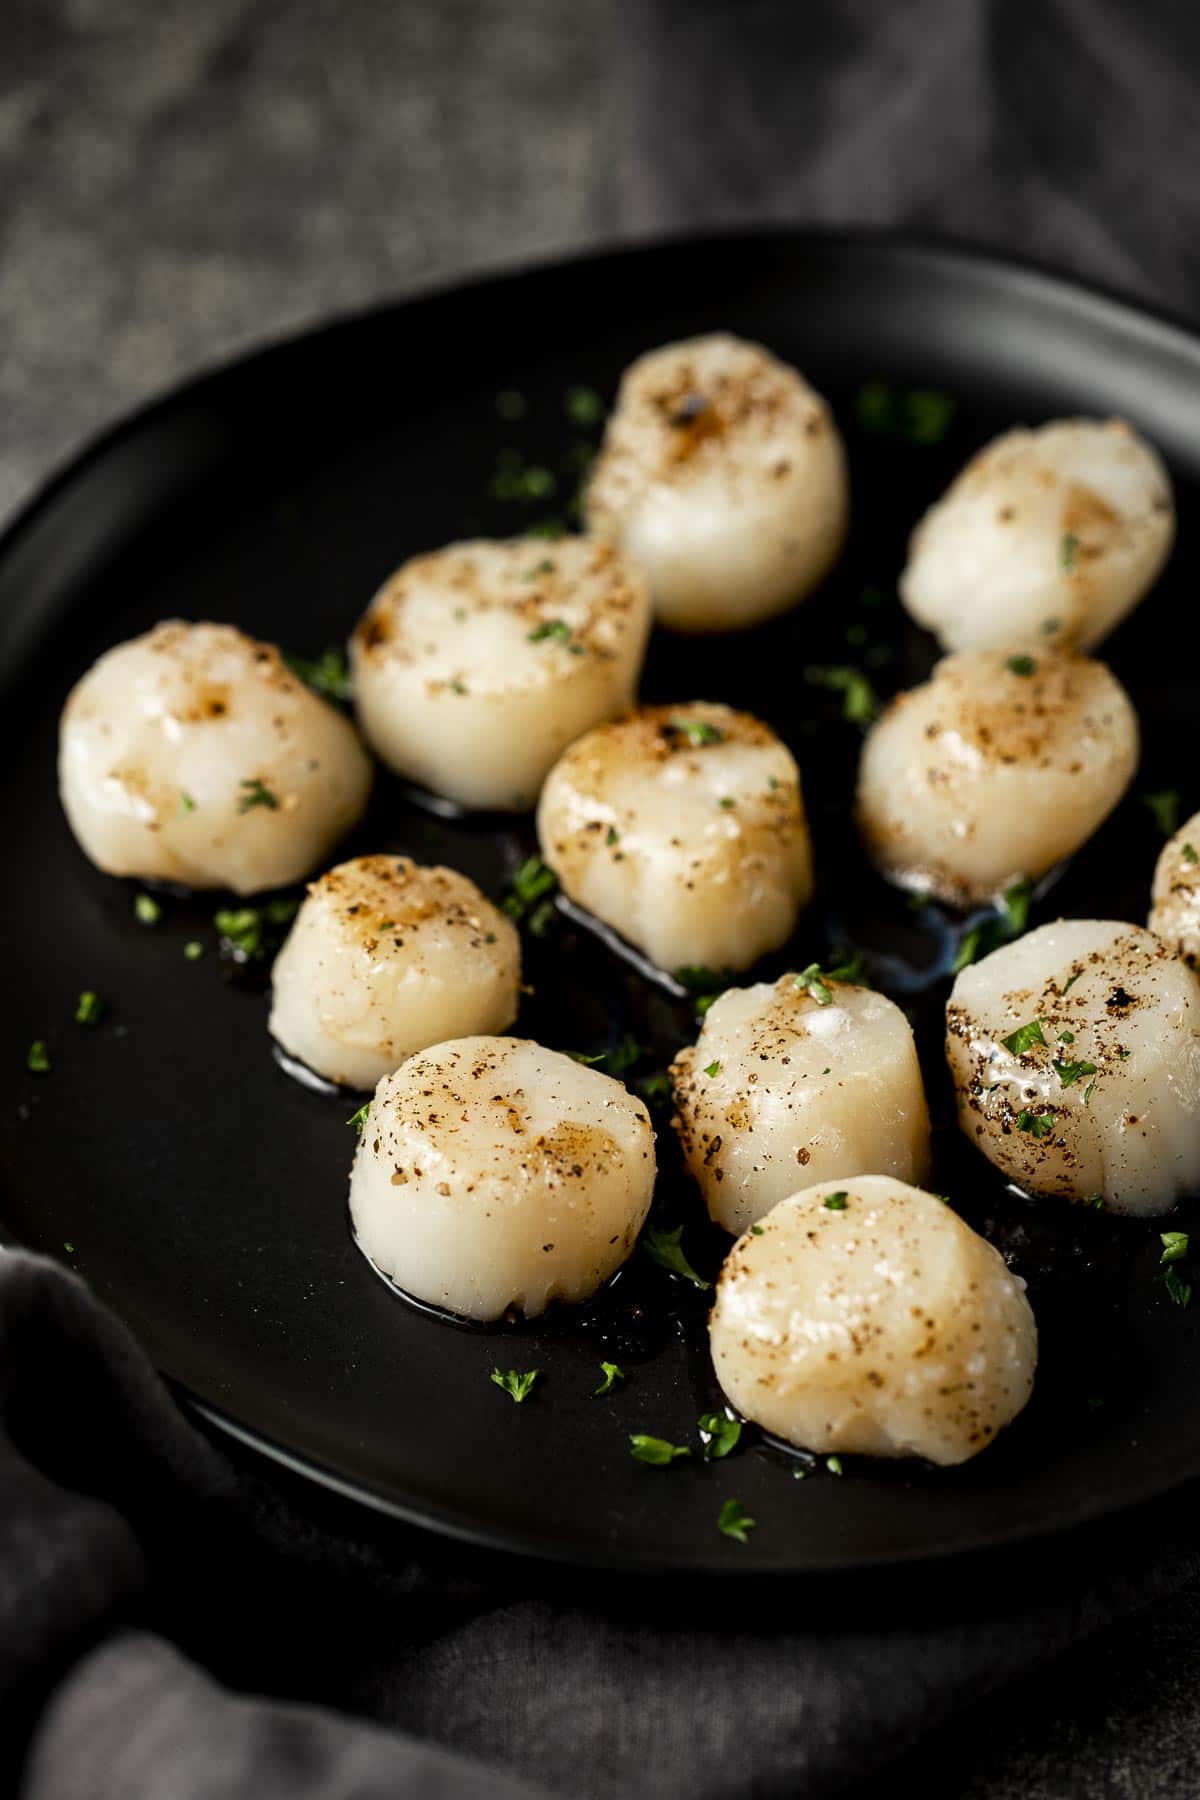 Broiled scallops with browned butter served on a black plate.